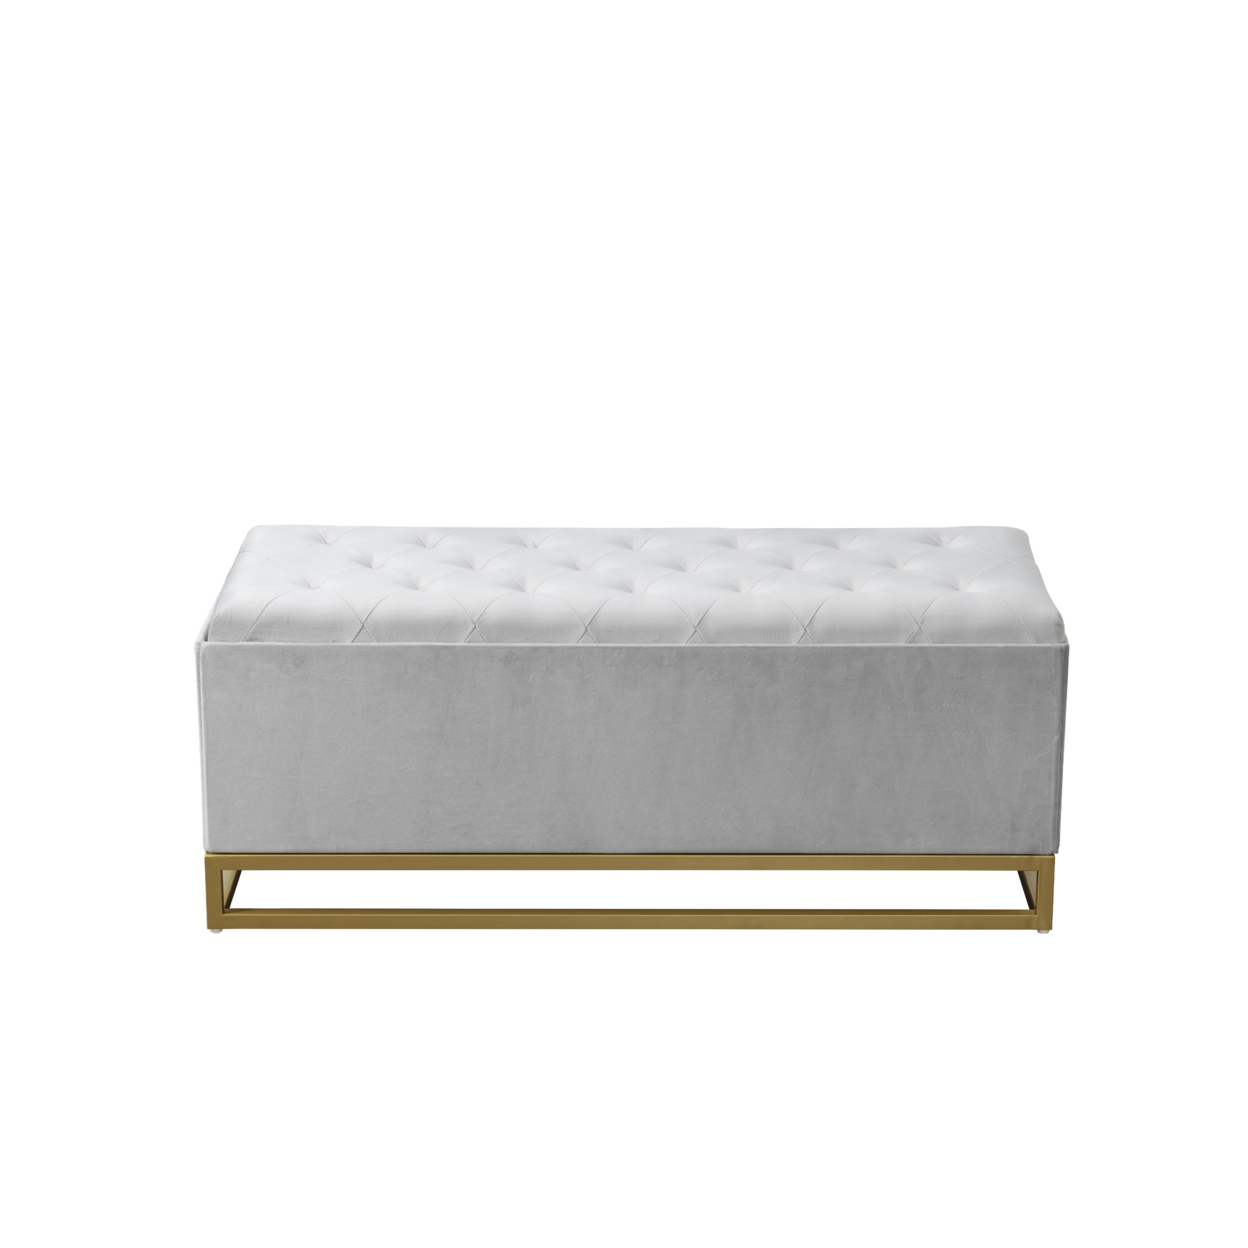 Iconic Home Kaili Storage Bench Velvet Upholstered Tufted Seat Gold Tone Metal Base With Discrete Interior Compartment - Blue